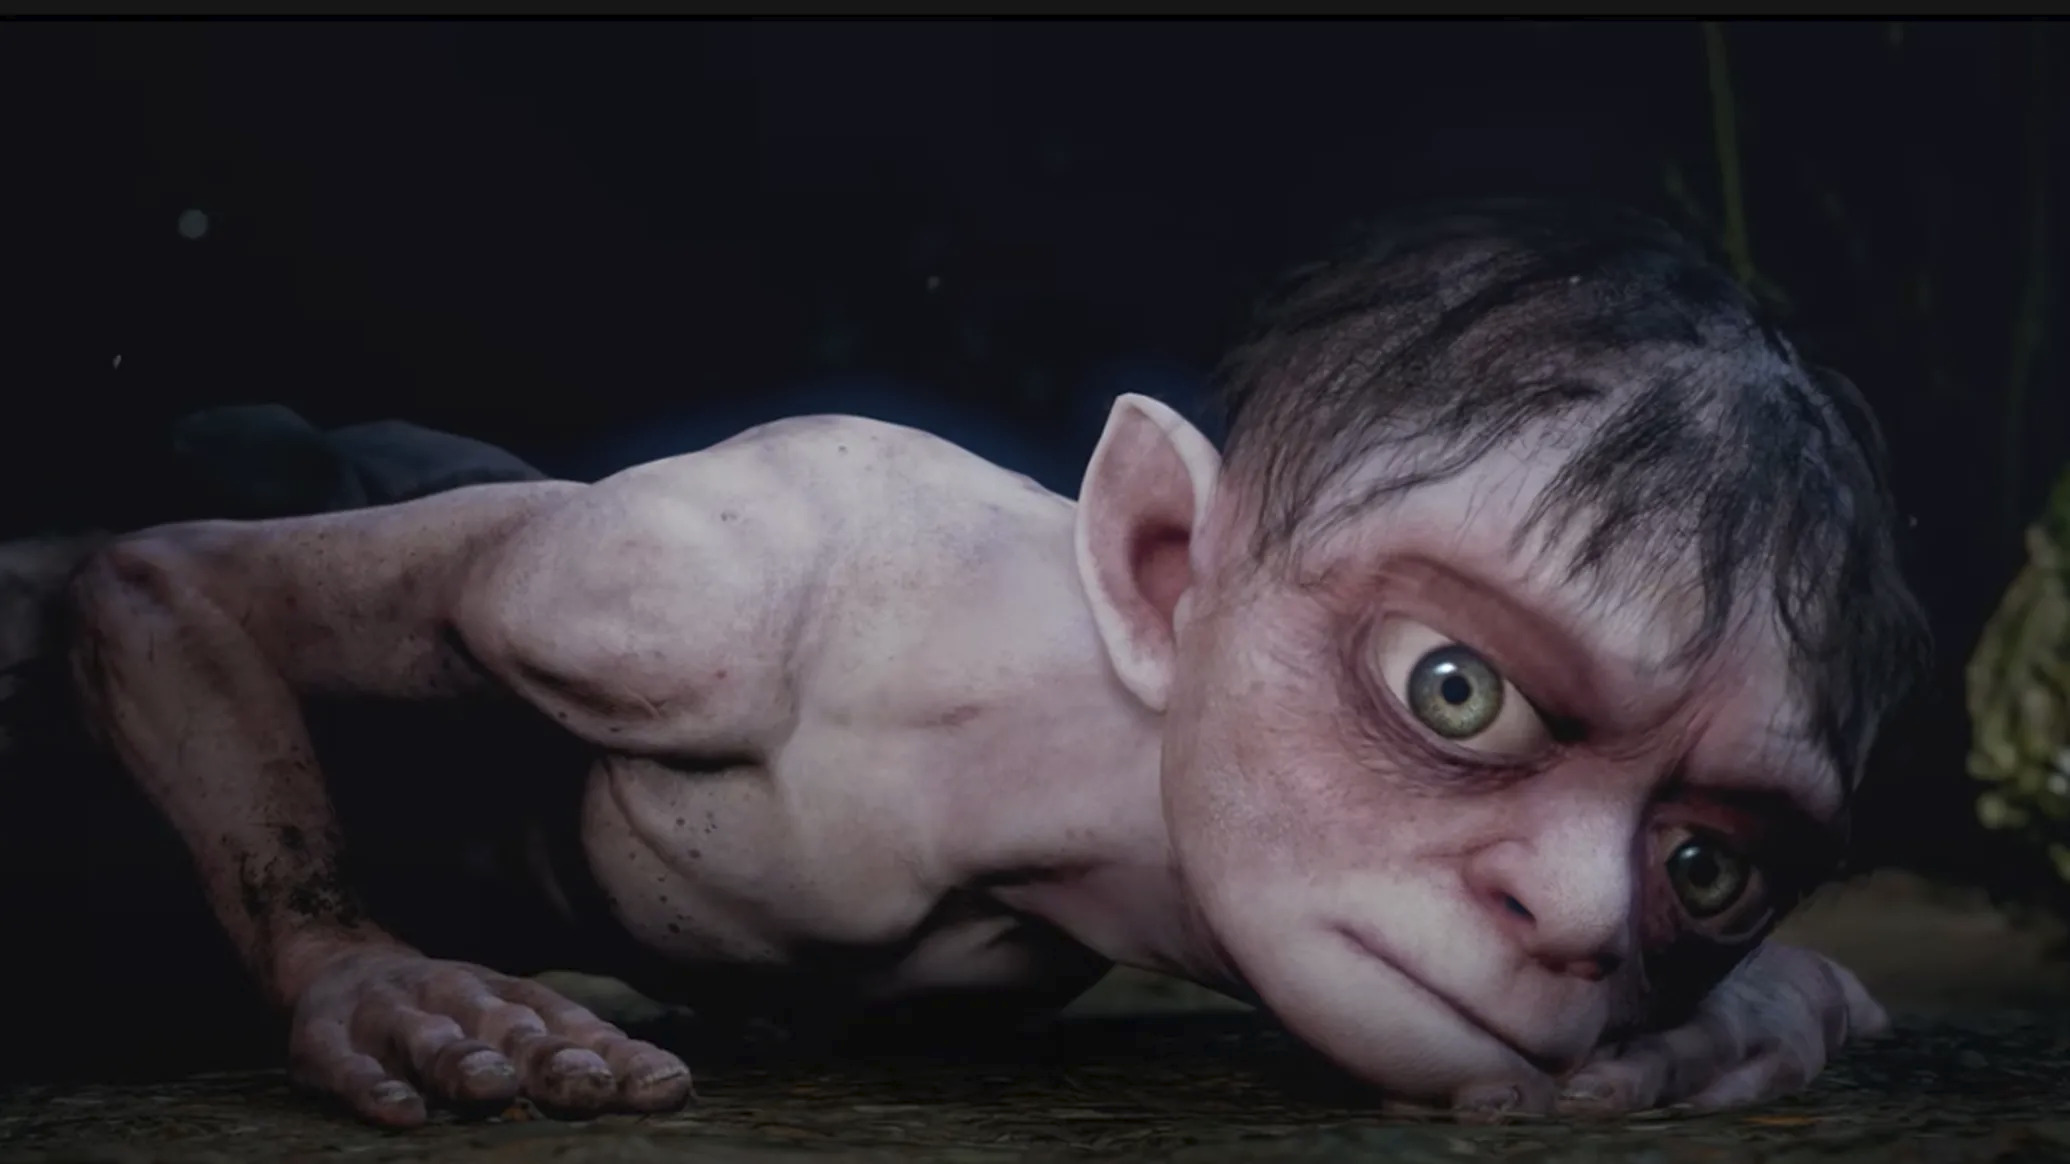 Developers of 'The Lord of the Rings: Gollum' game apologize for 'disappointing experience'

